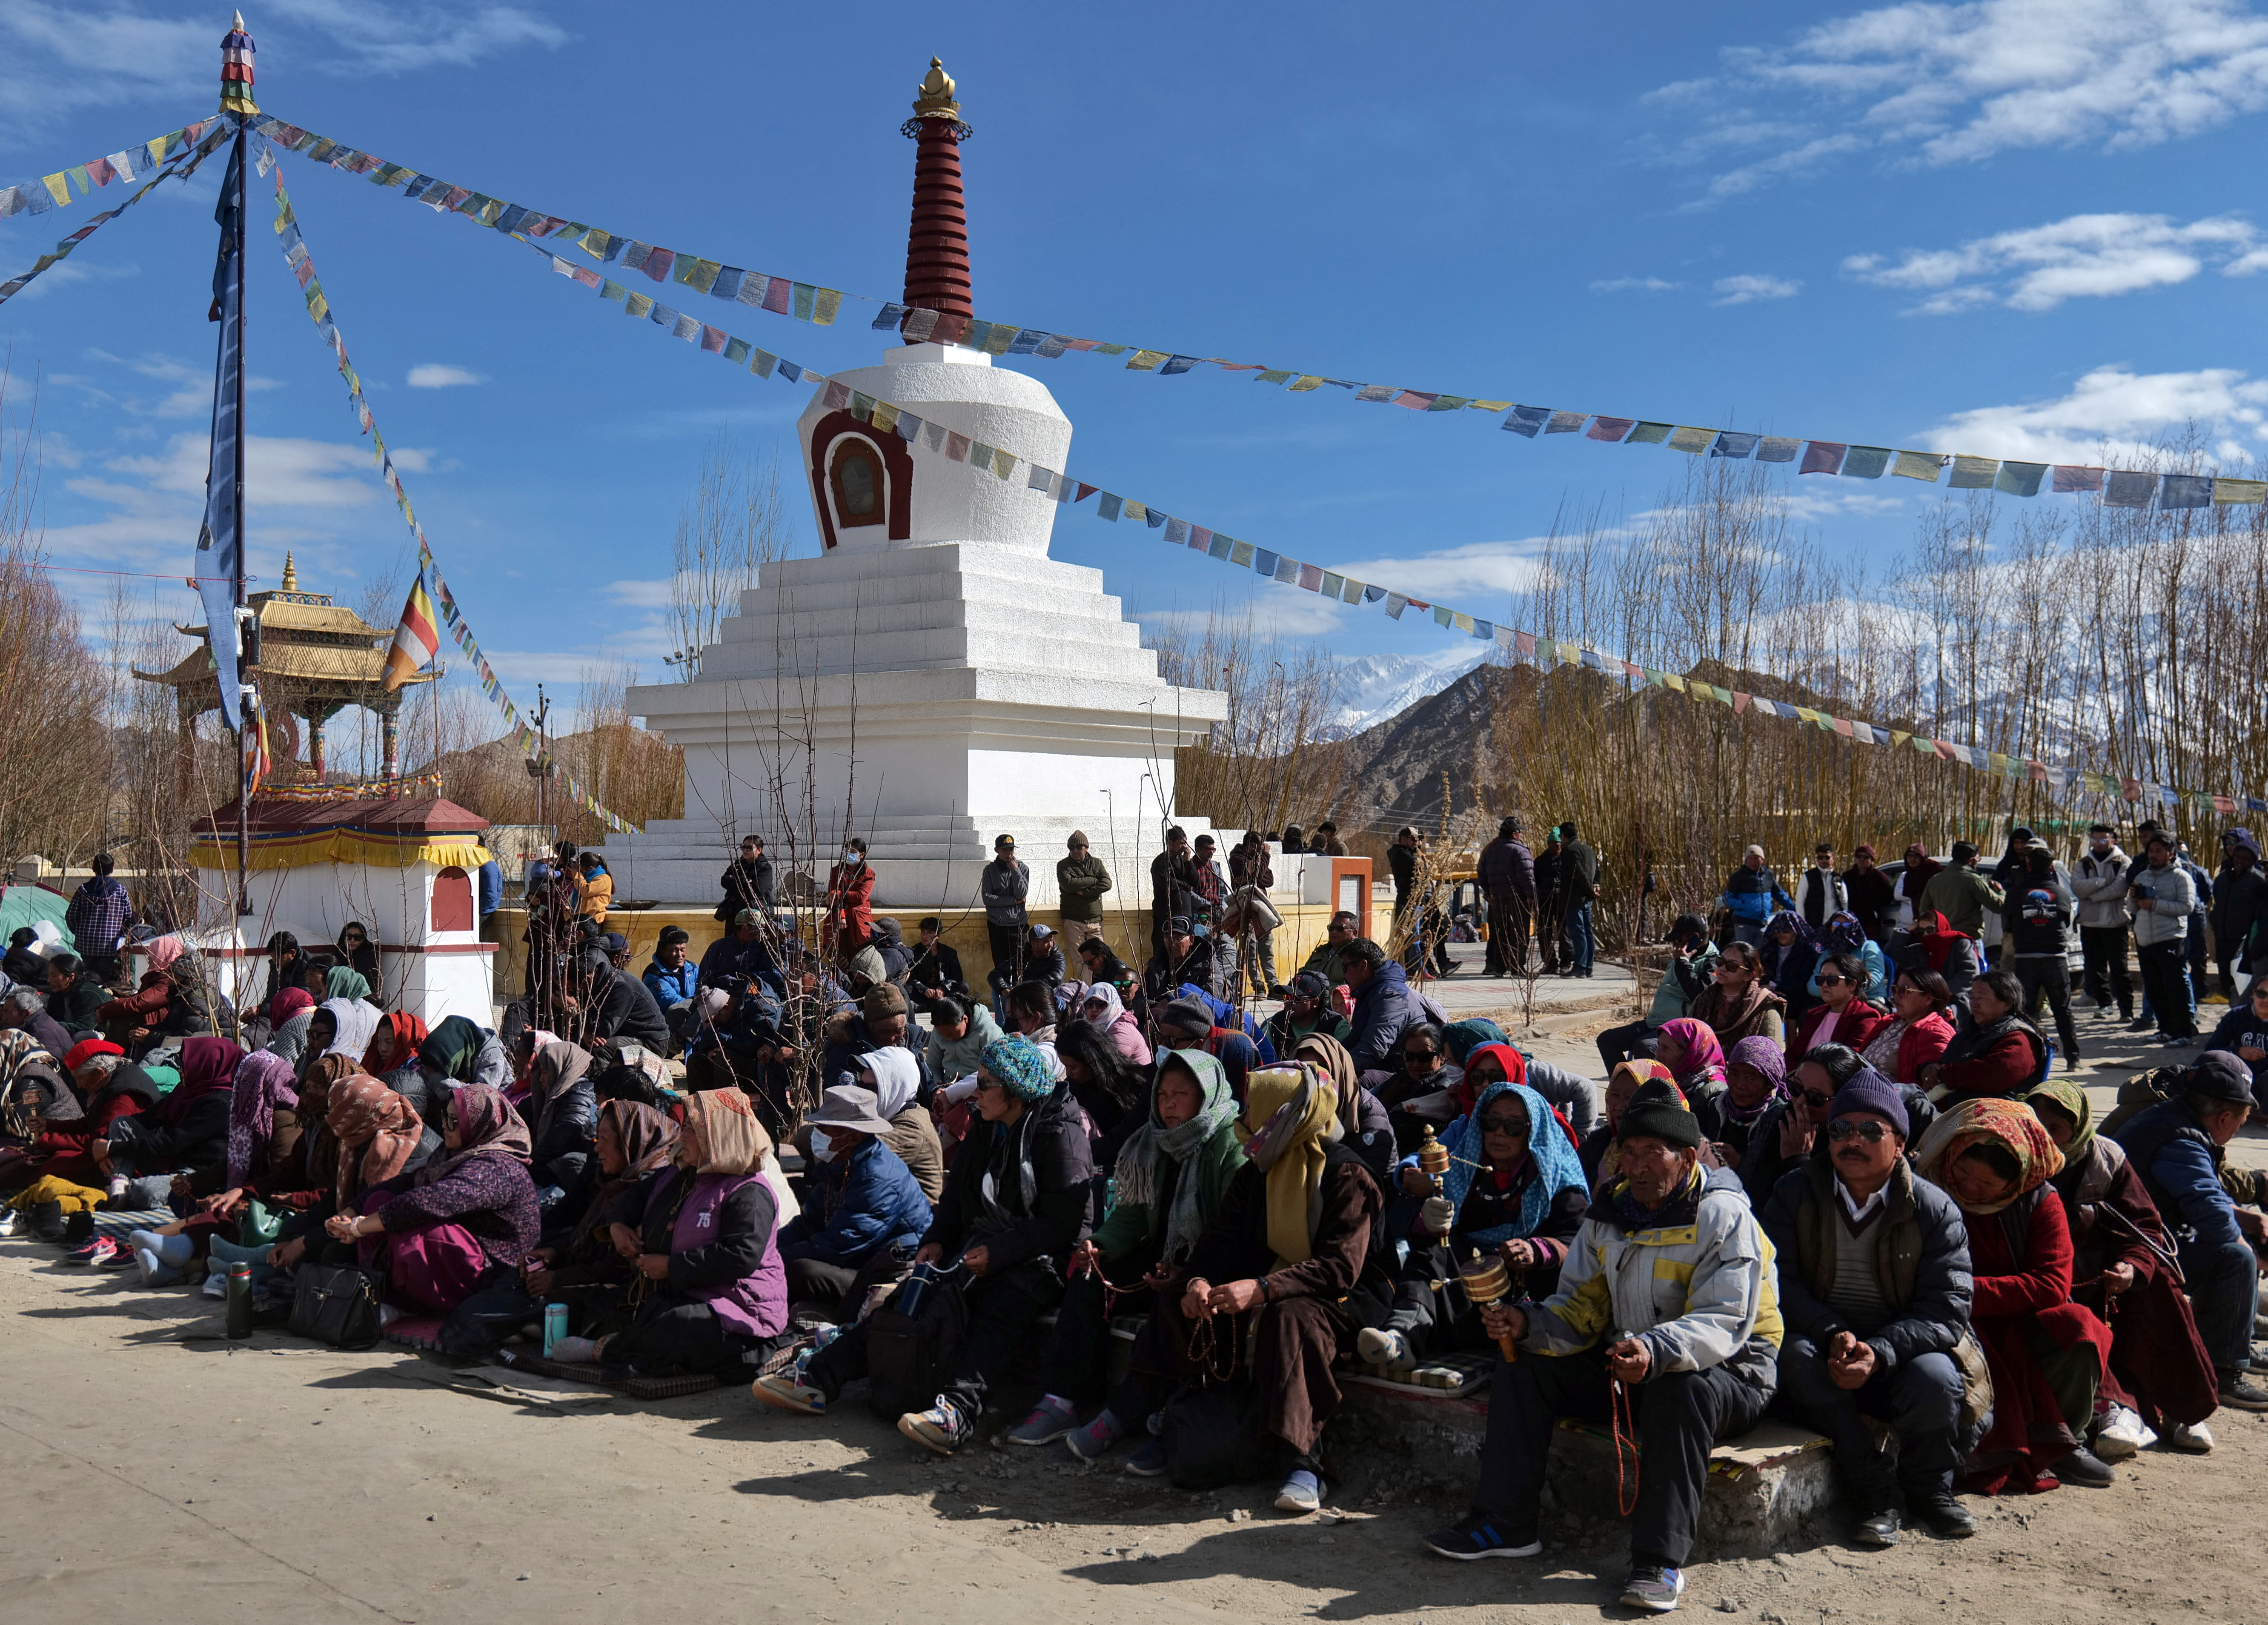 Demonstrators attend a sit-in protest demanding constitutional safeguards and statehood in Ladakh